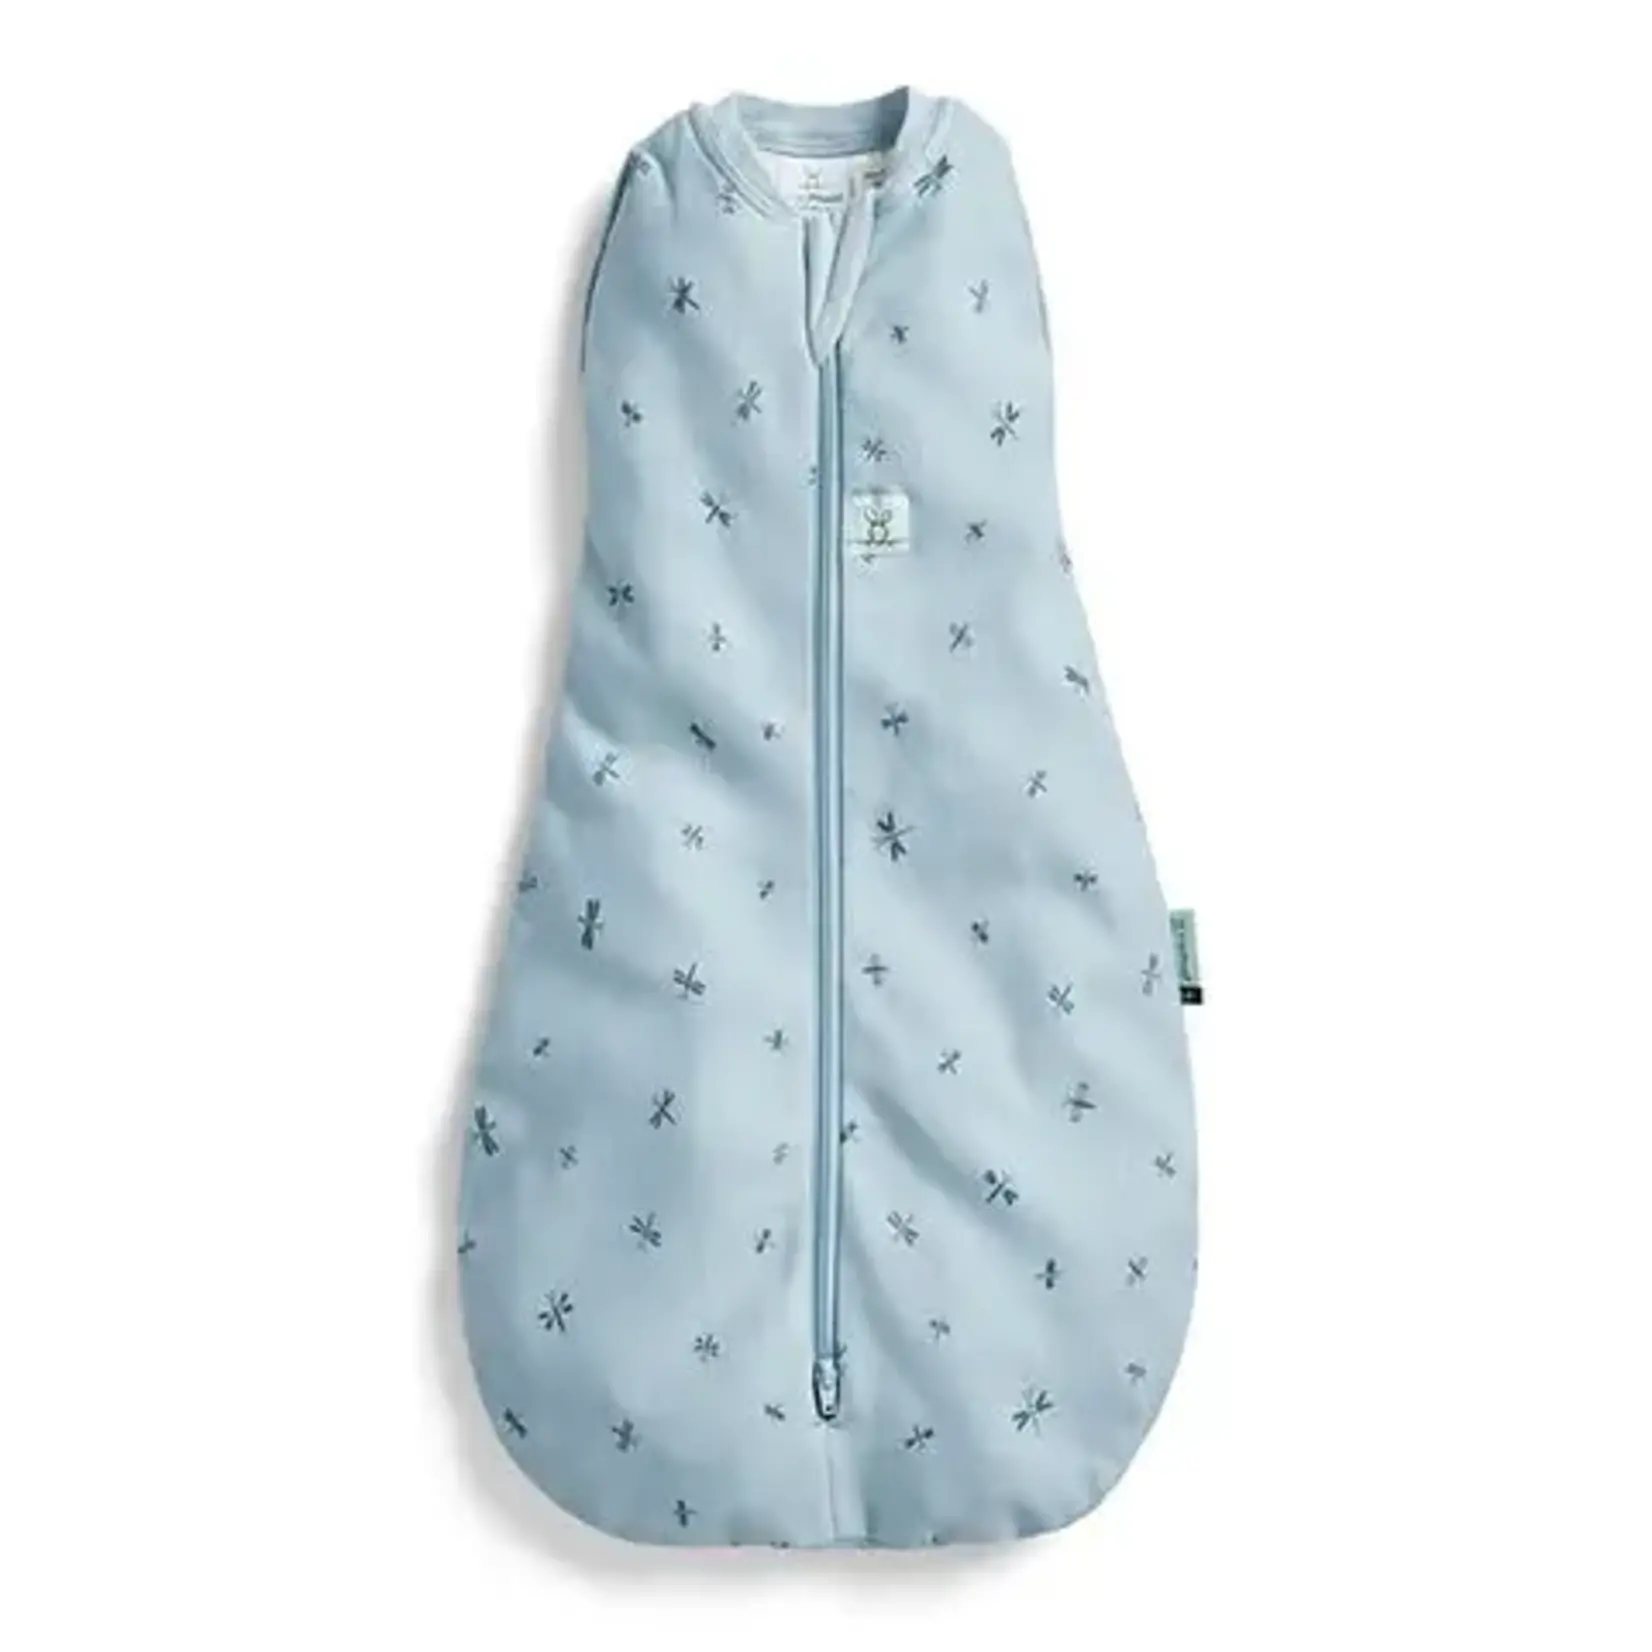 Ergopouch ERGOPOUCH 1.0 TOG COCOON SWADDLE BAG DRAGONFLIES